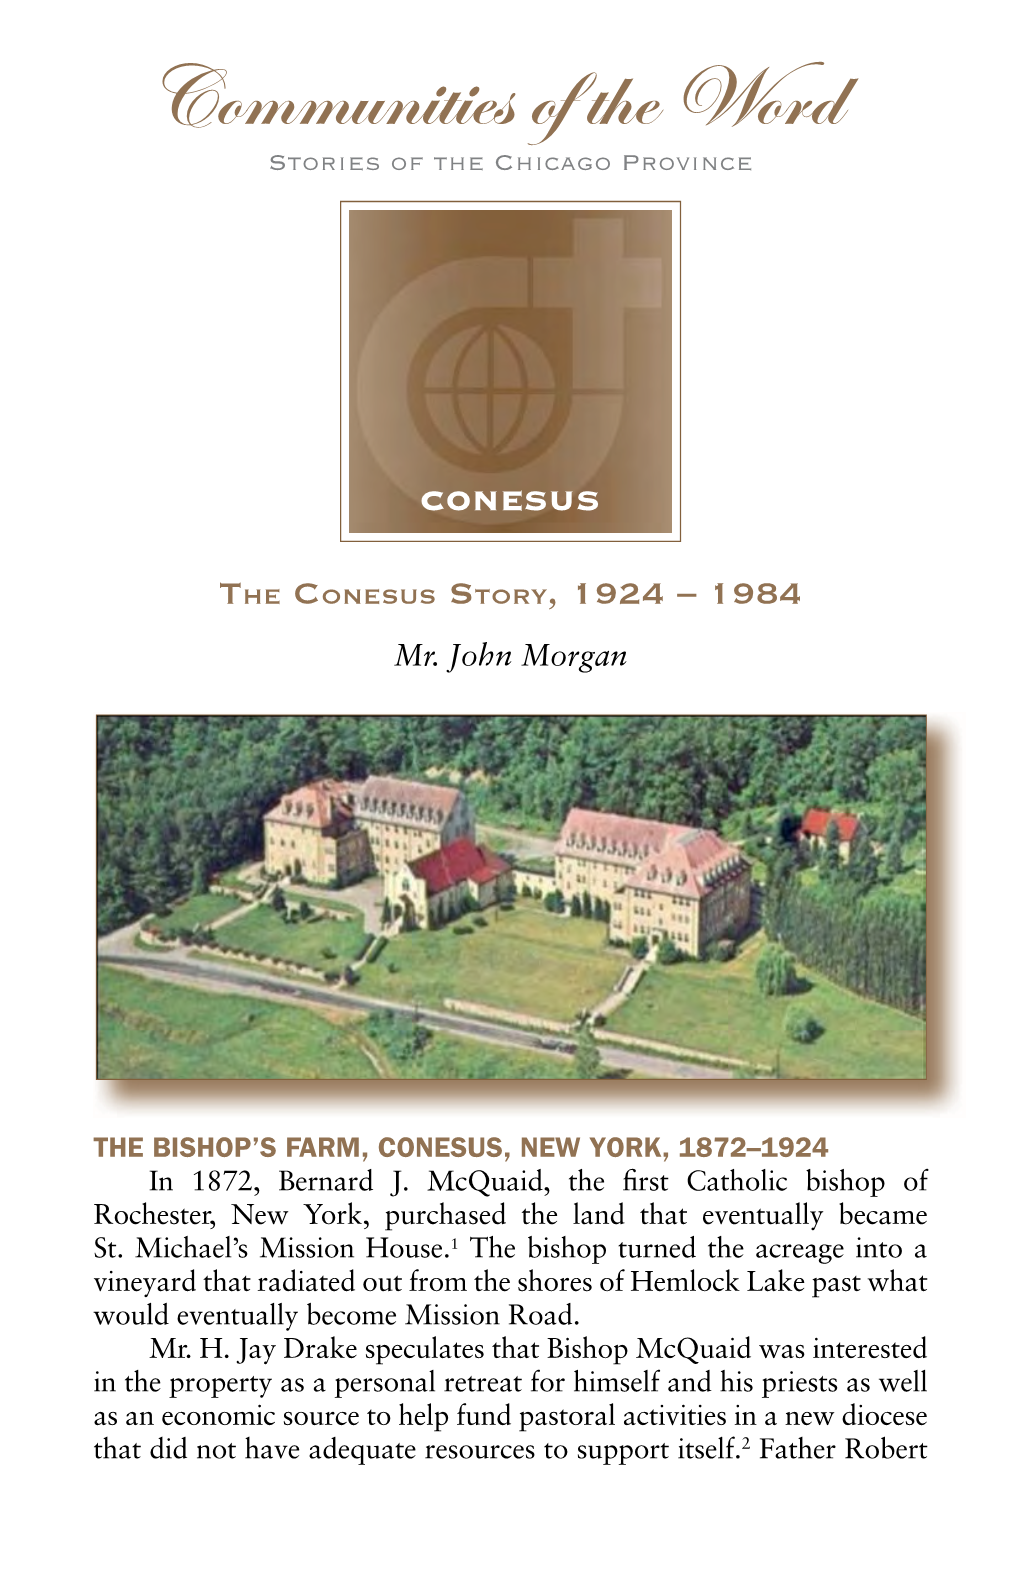 The Conesus Story, 1924 – 1984